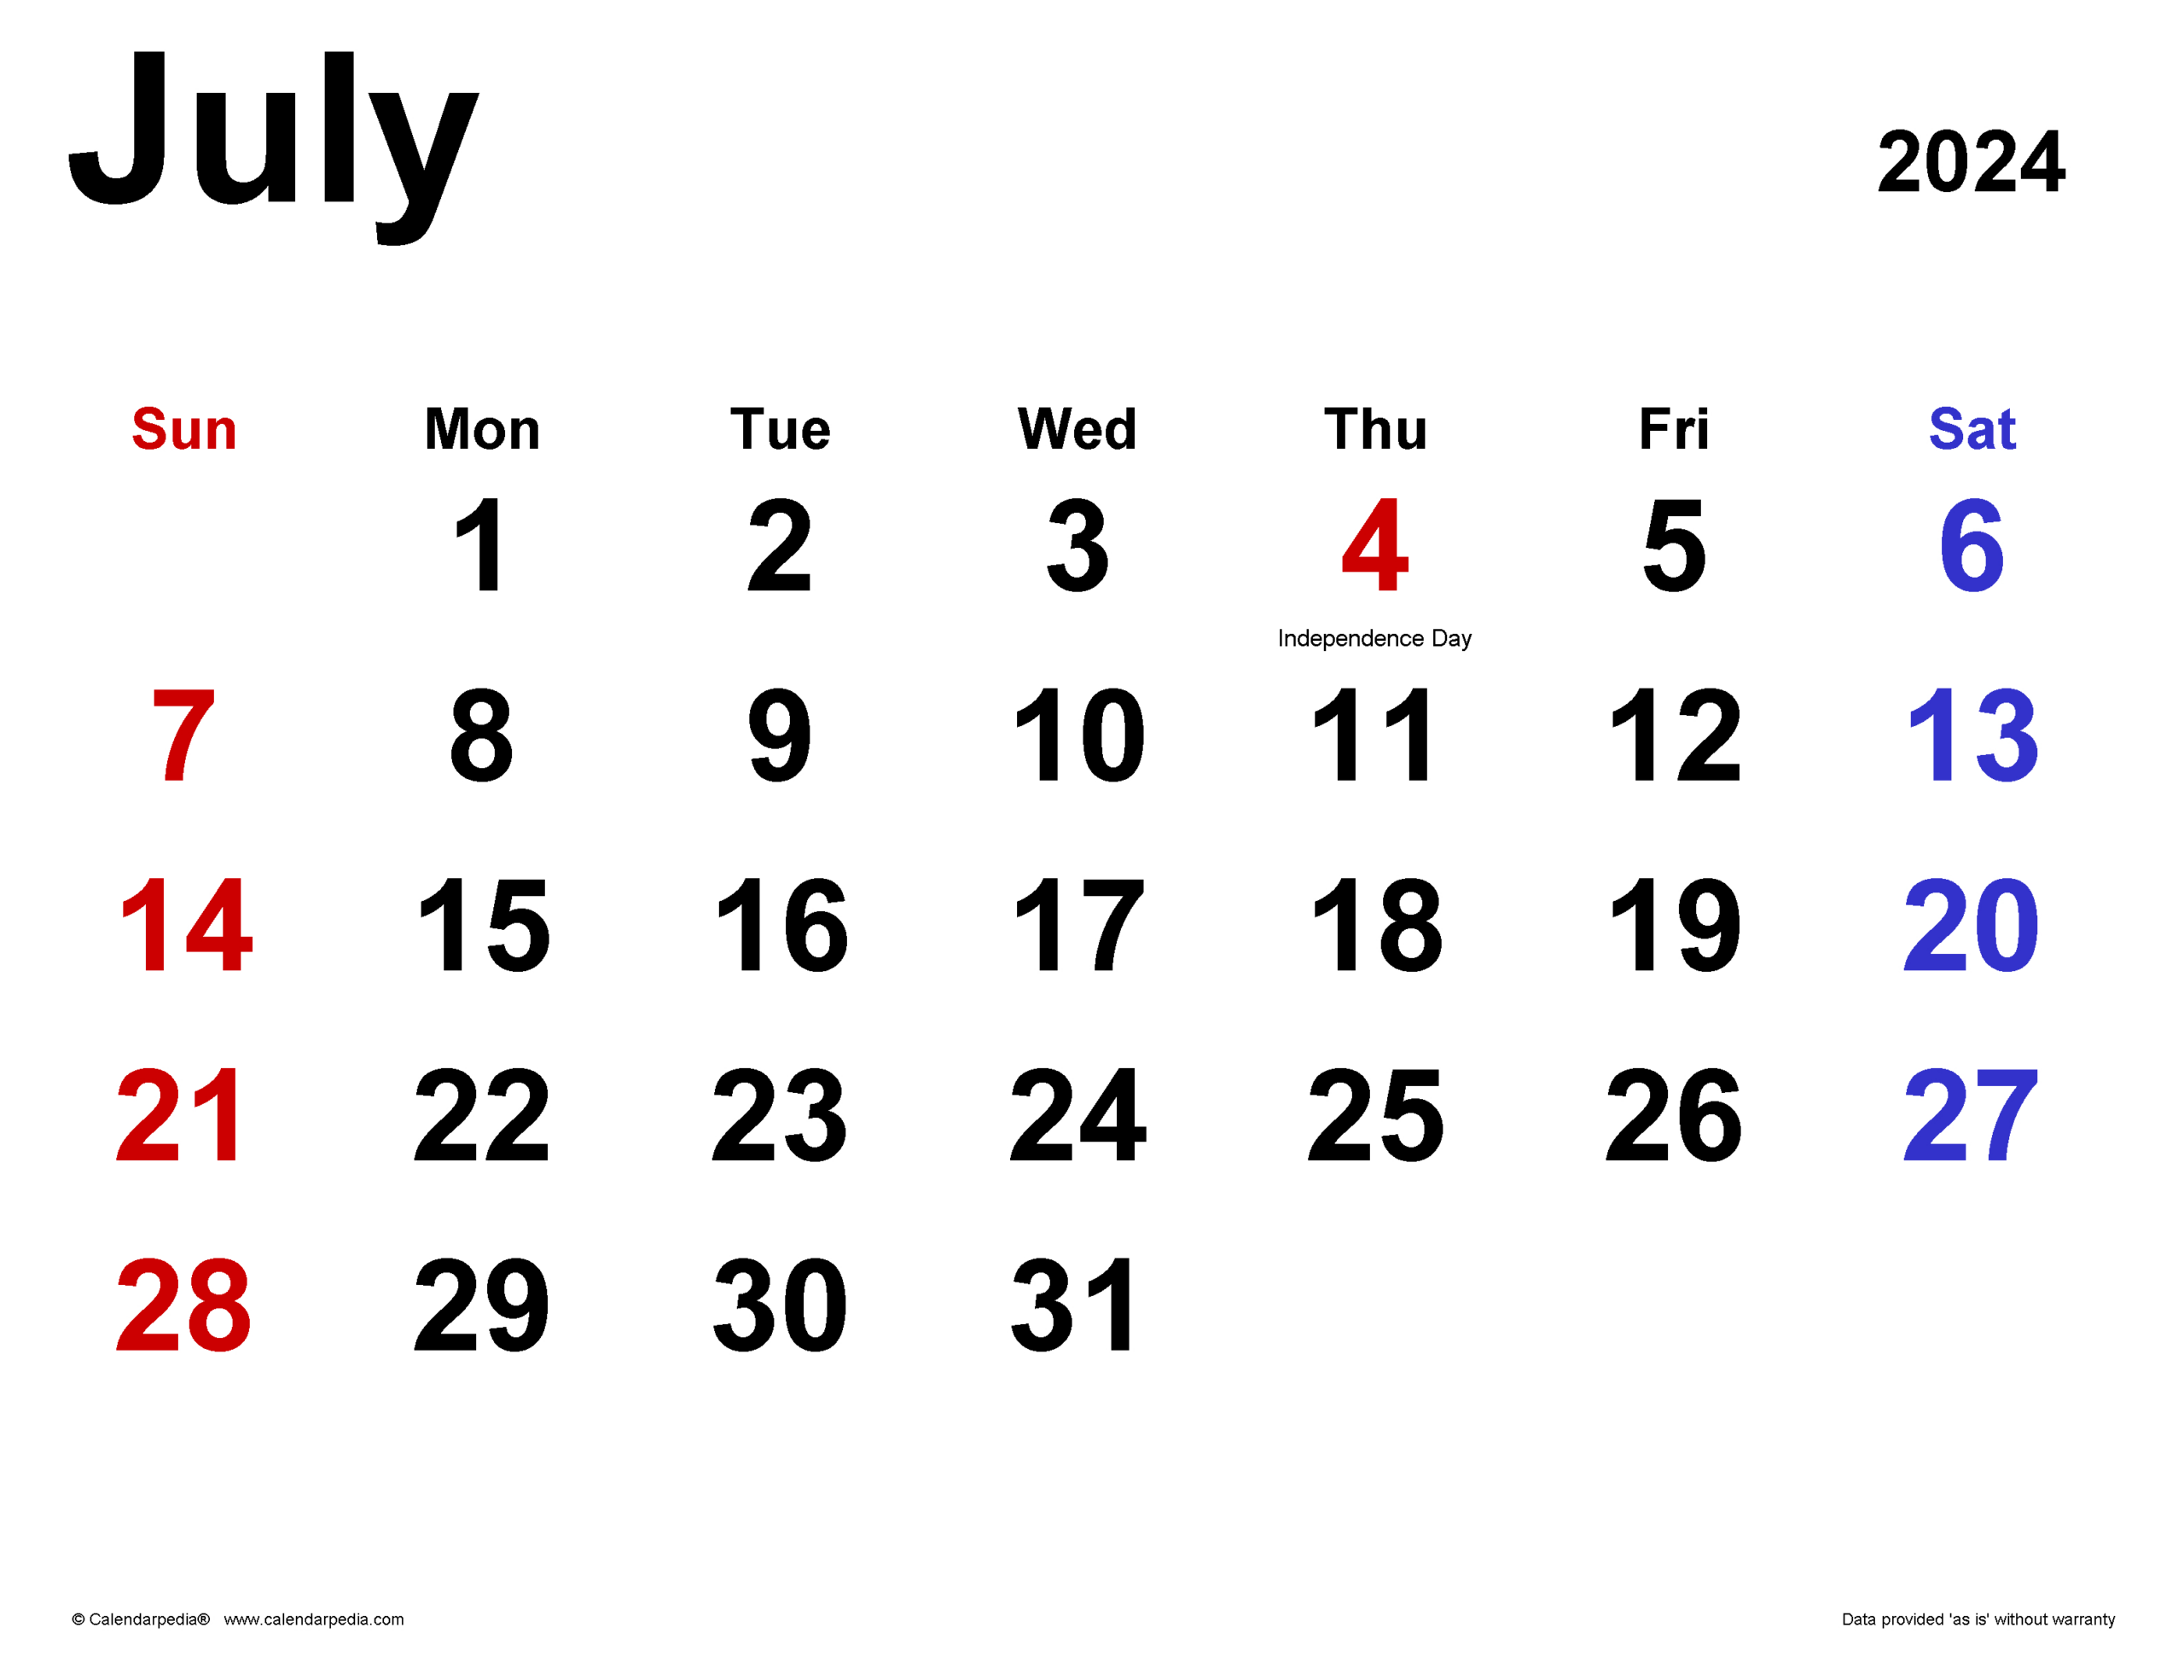 July 2024 Calendar | Templates For Word, Excel And Pdf in July Calendar 2024 Special Days